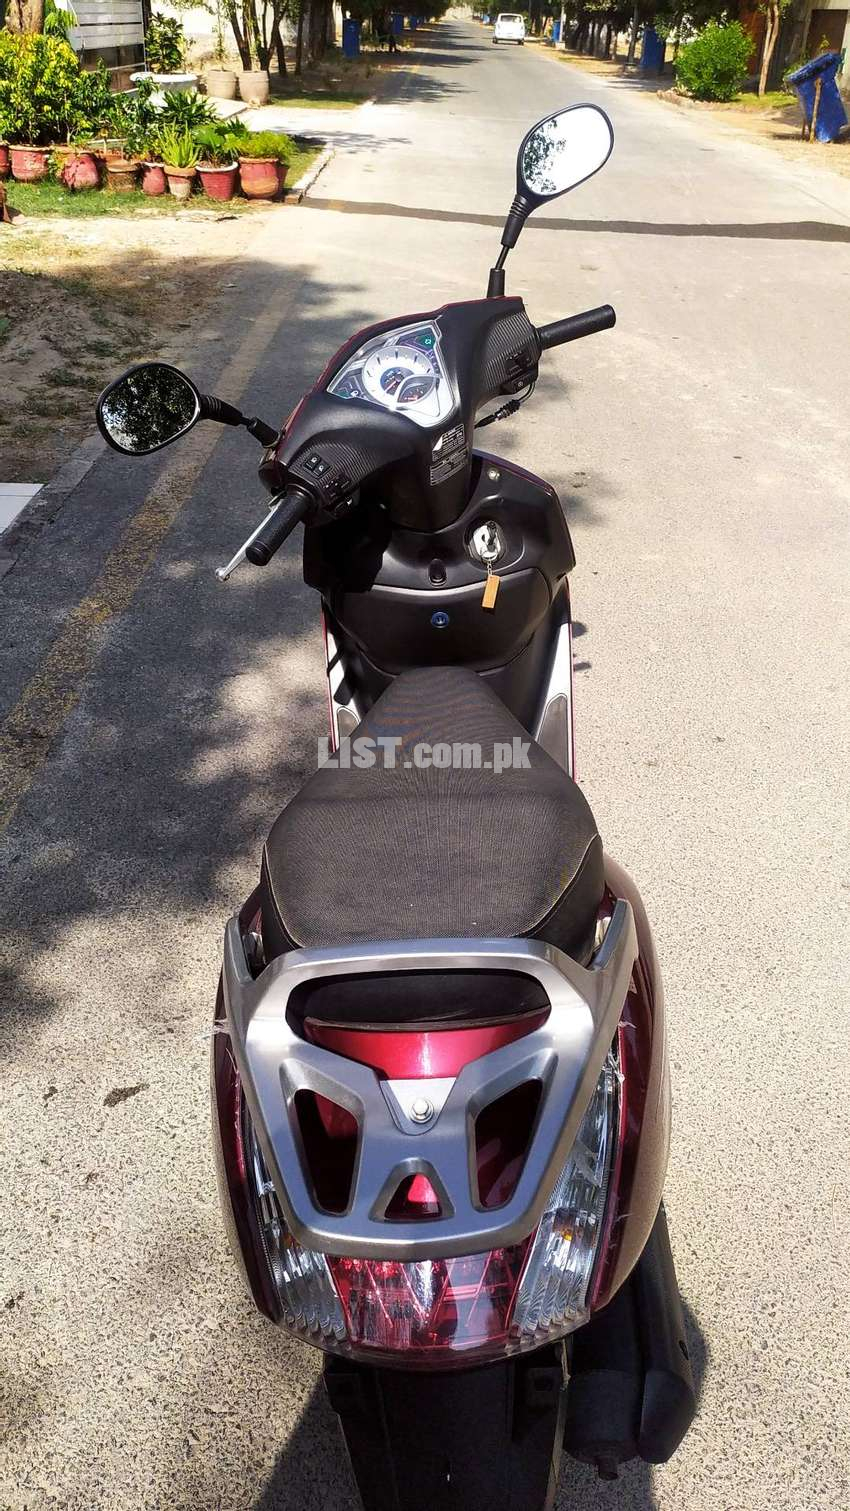 United Scooter